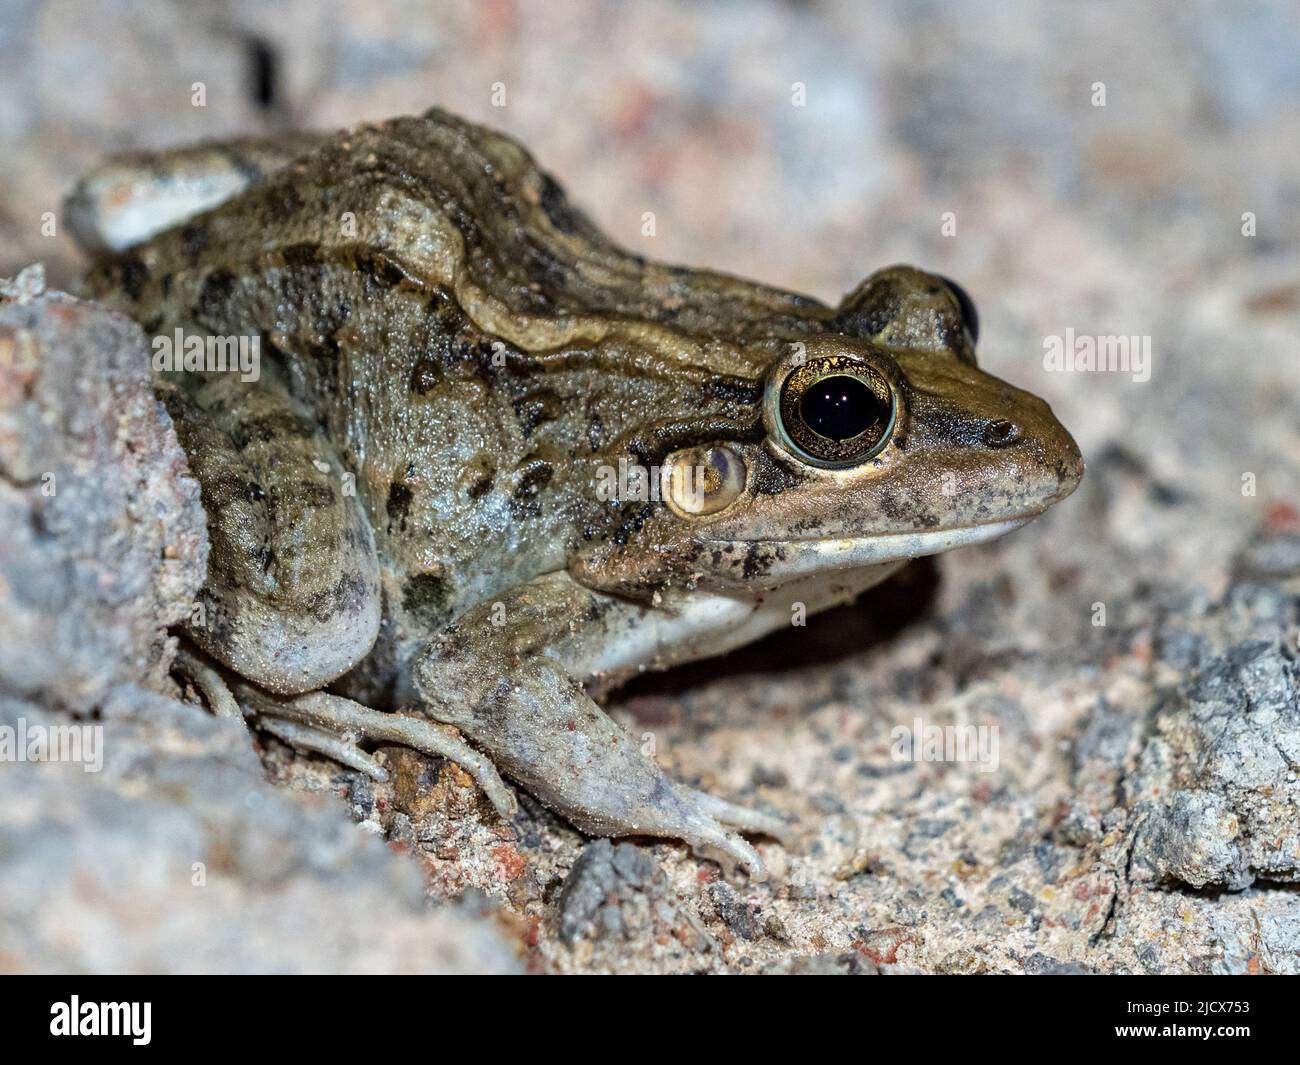 Adult frog from the order Anura, Pouso Allegre, Mato Grosso, Pantanal, Brazil, South America Stock Photo